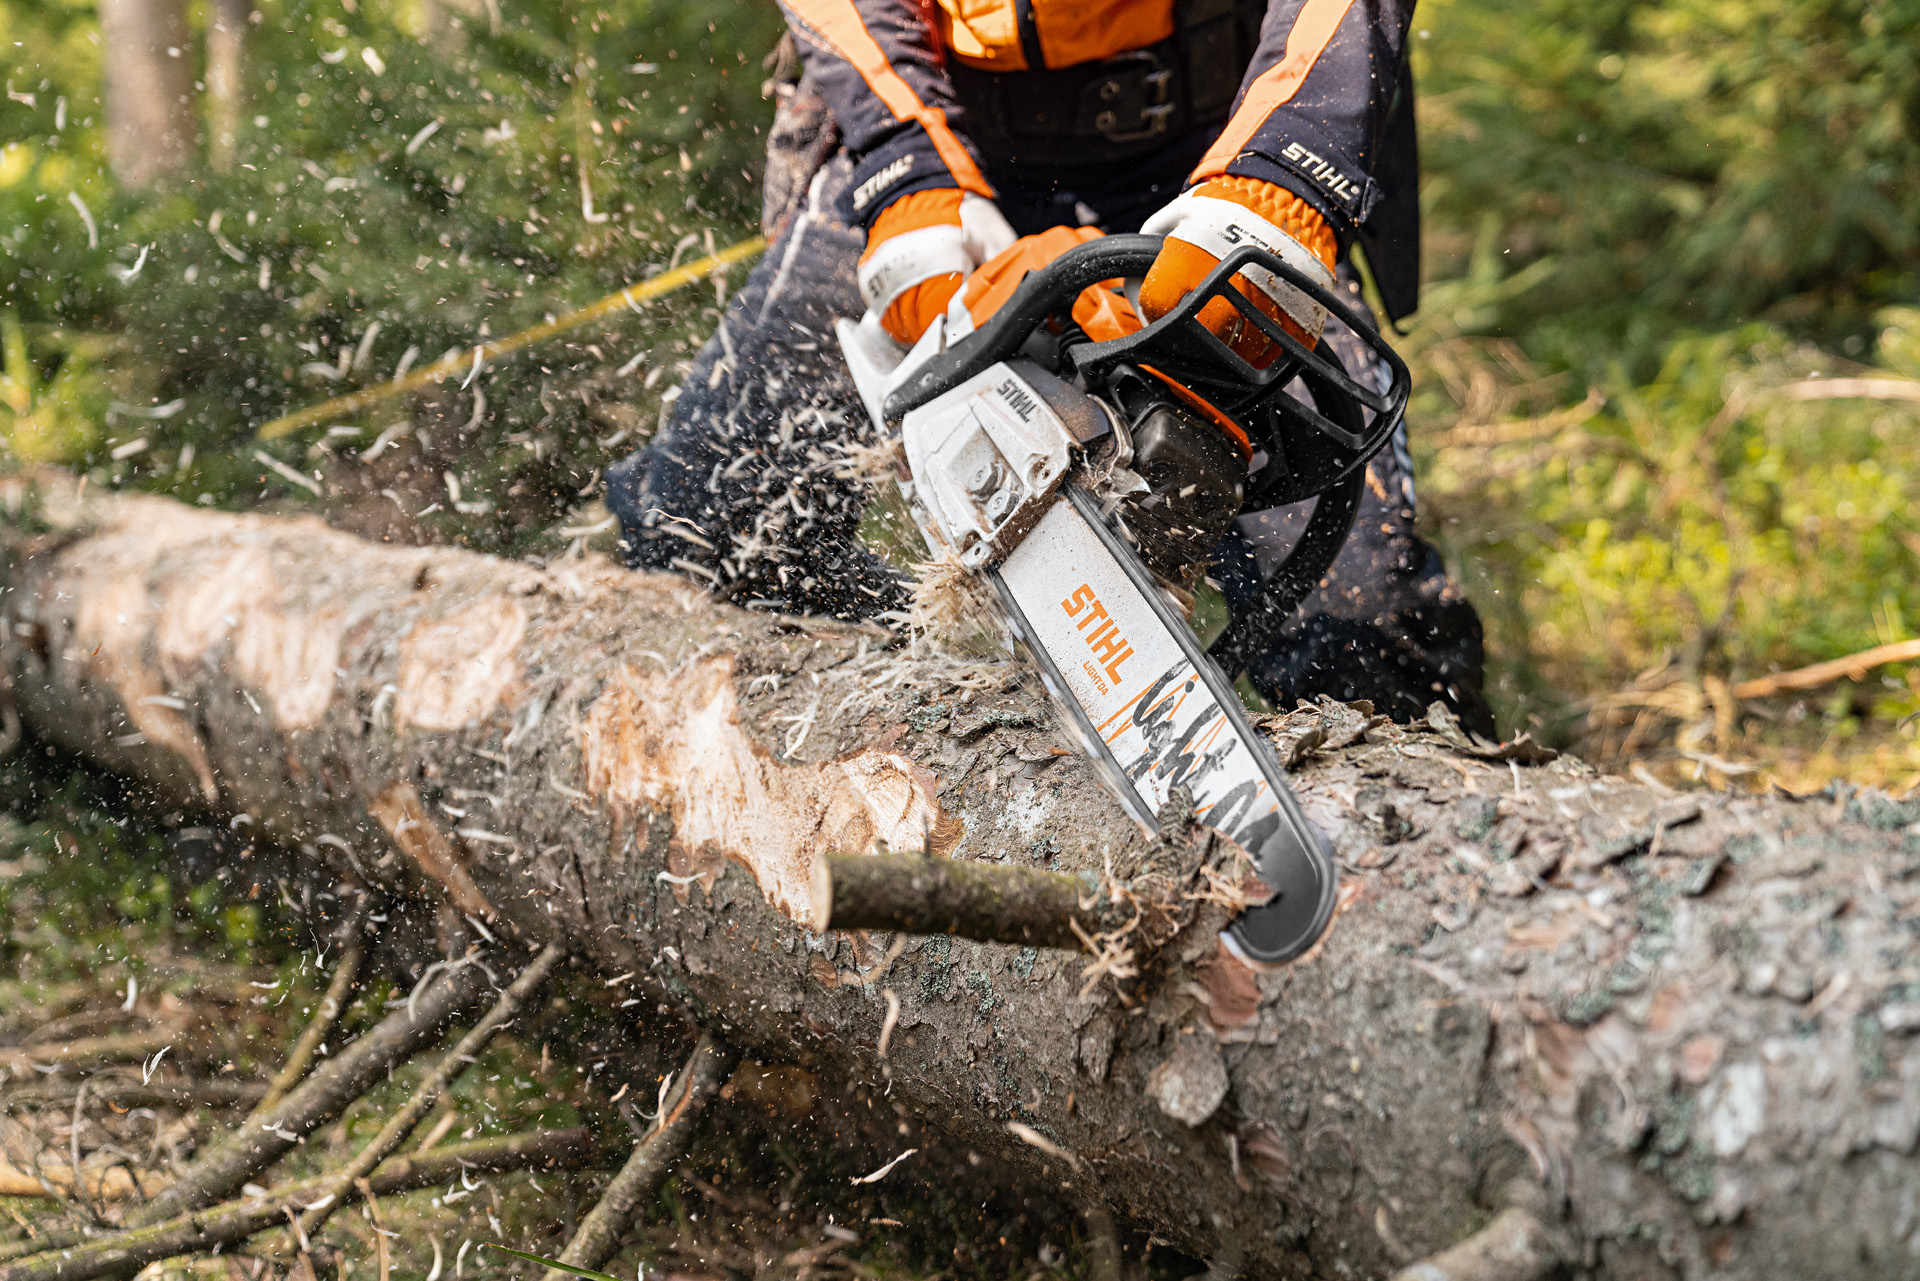 A tree on the ground being debarked with a STIHL MS 261 C-M petrol chainsaw with 2-MIX engine and Light 04 guide bar